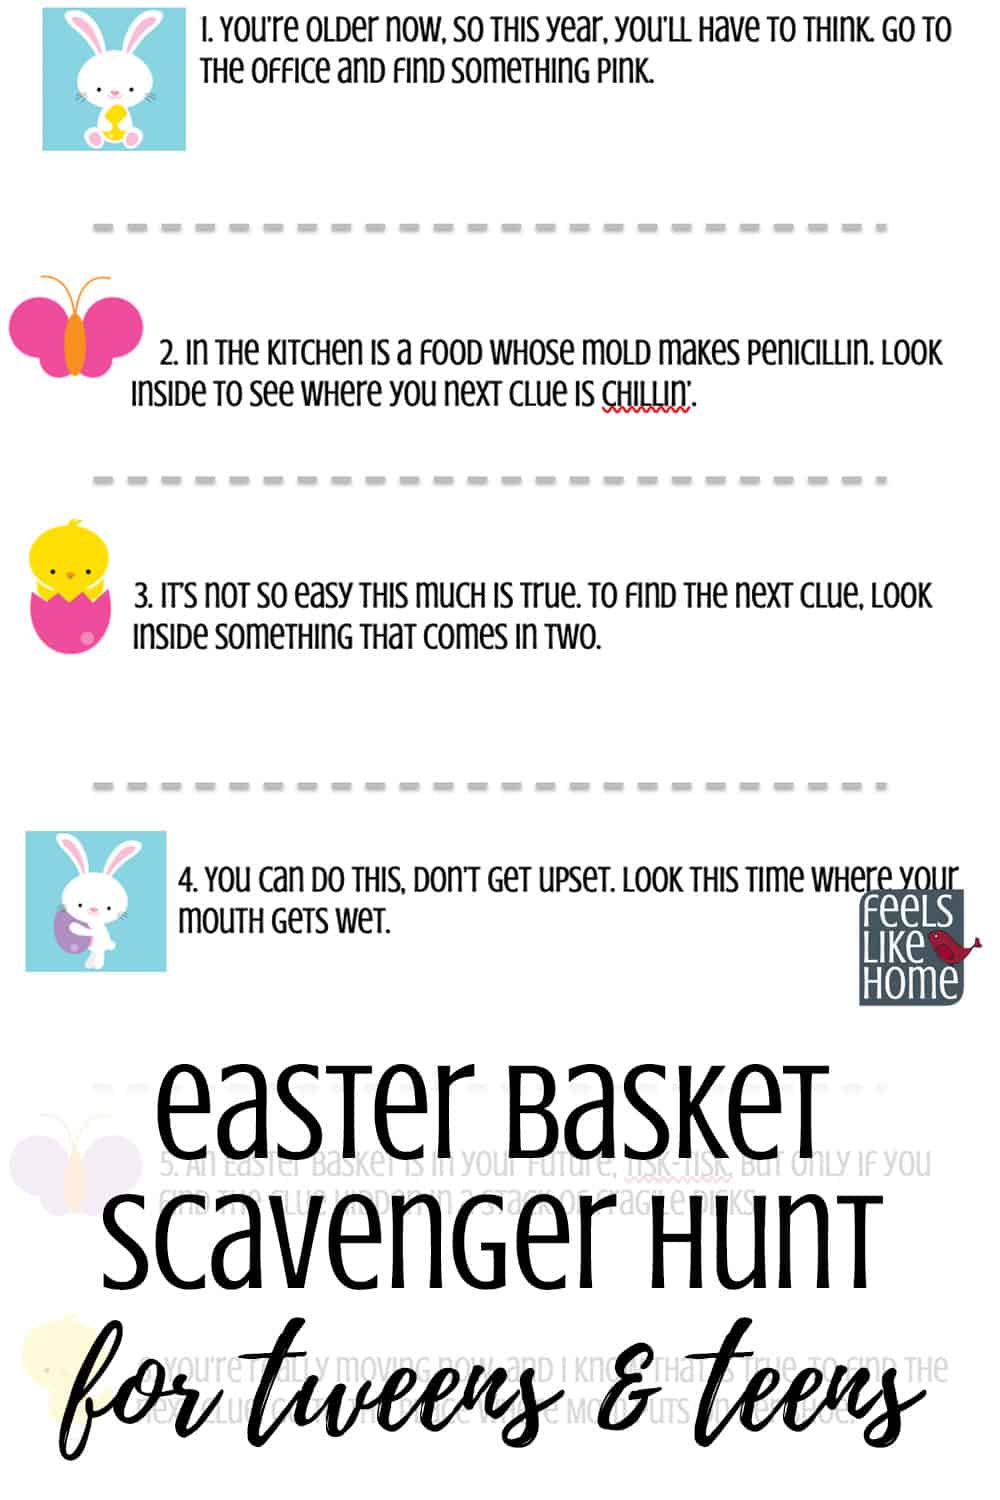 Free printable active Easter basket scavenger hunt for Easter morning - A treasure hunt is a great way to find your Easter basket. This hunt for tweens and teens uses rhymes and riddles as clues. Awesome challenging fun in riddles. Great for families at home. Non-religious. More difficult clues than my other hunts using both indoor and outdoor spots.